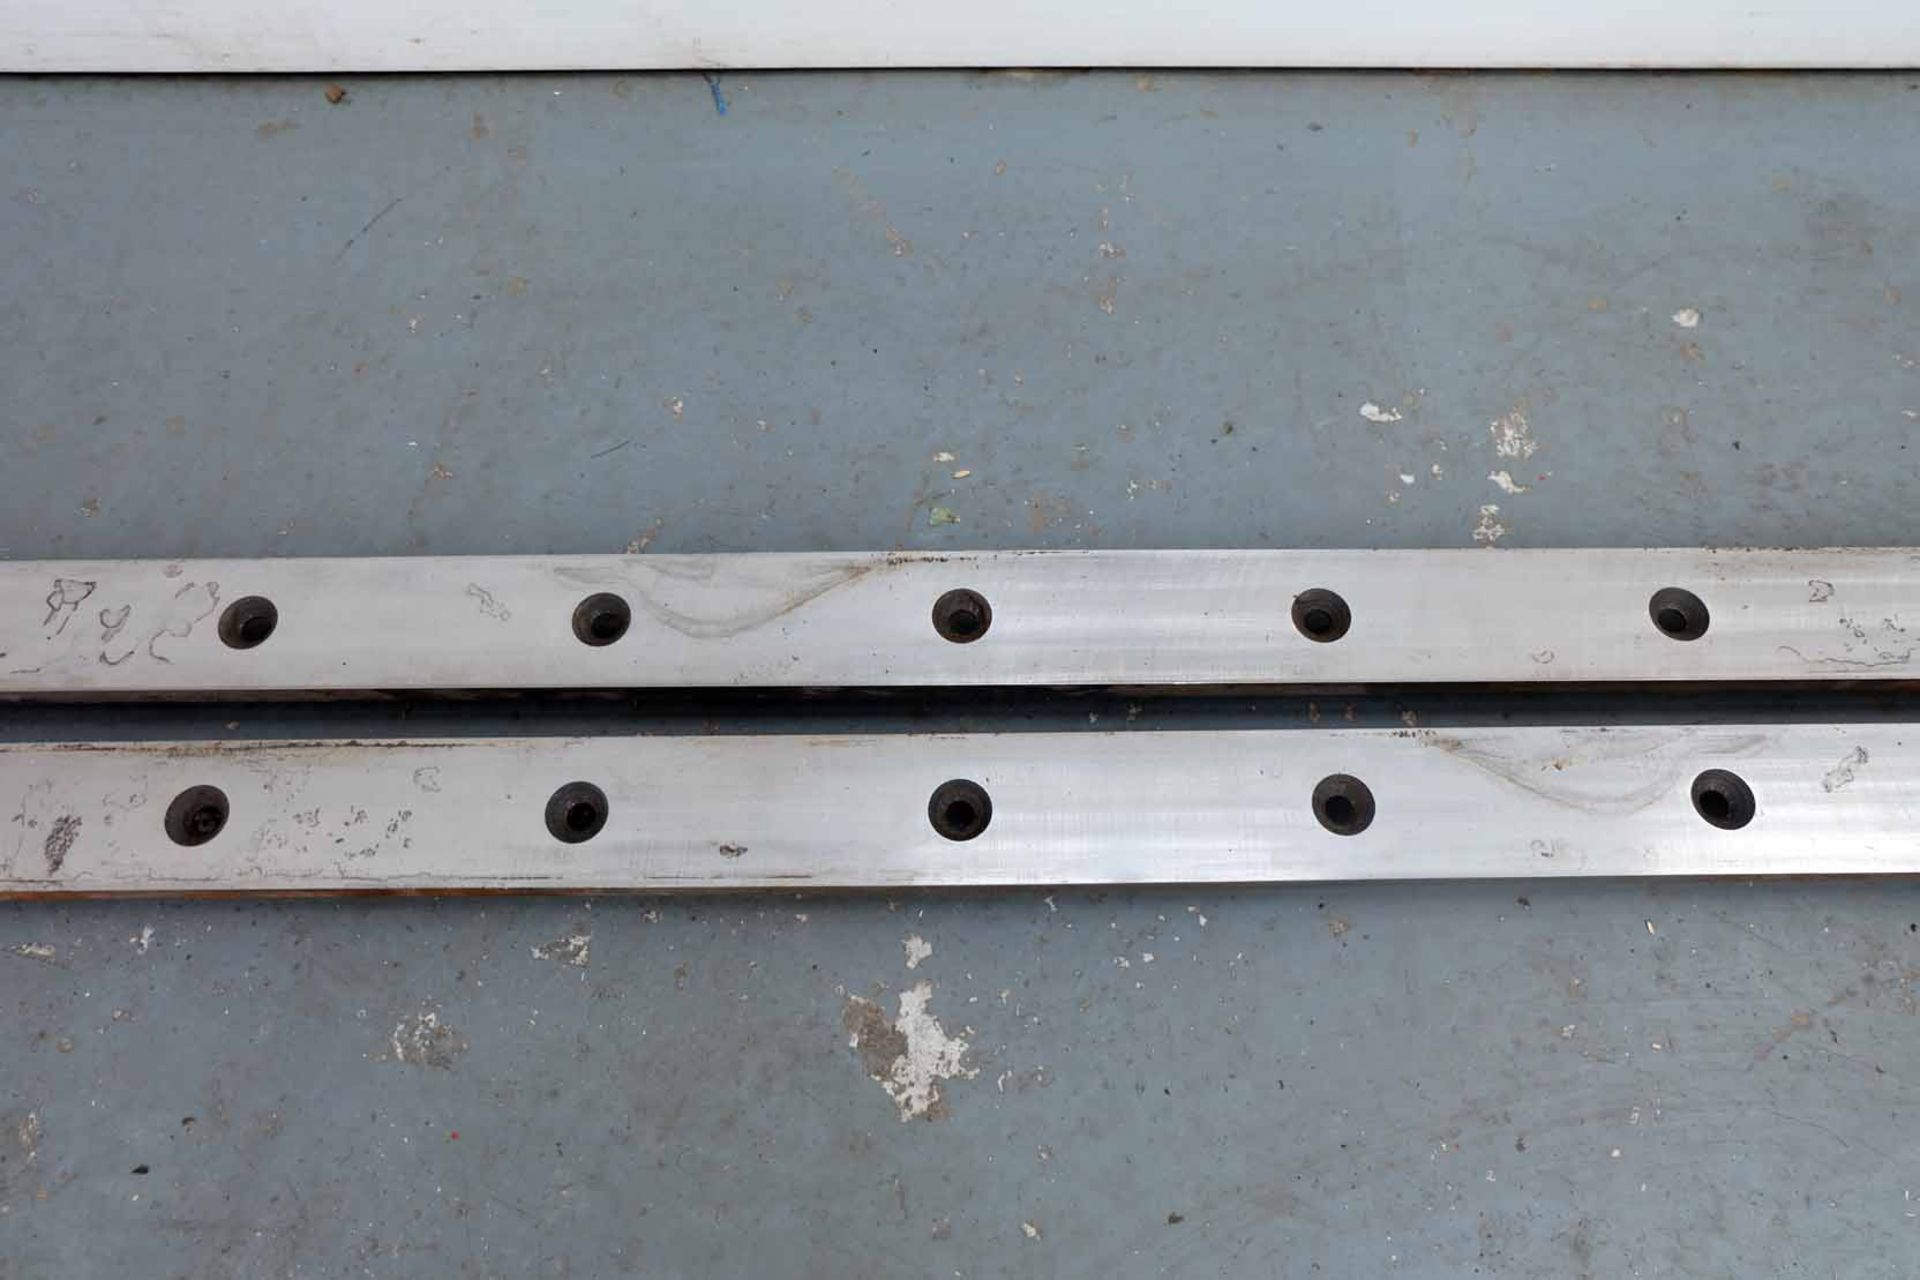 Pair of Guillotine Blades. Length 2034mm. Dimensions 62mm x 15mm. Double Sided. 14 Holes Counter Sun - Bild 3 aus 5